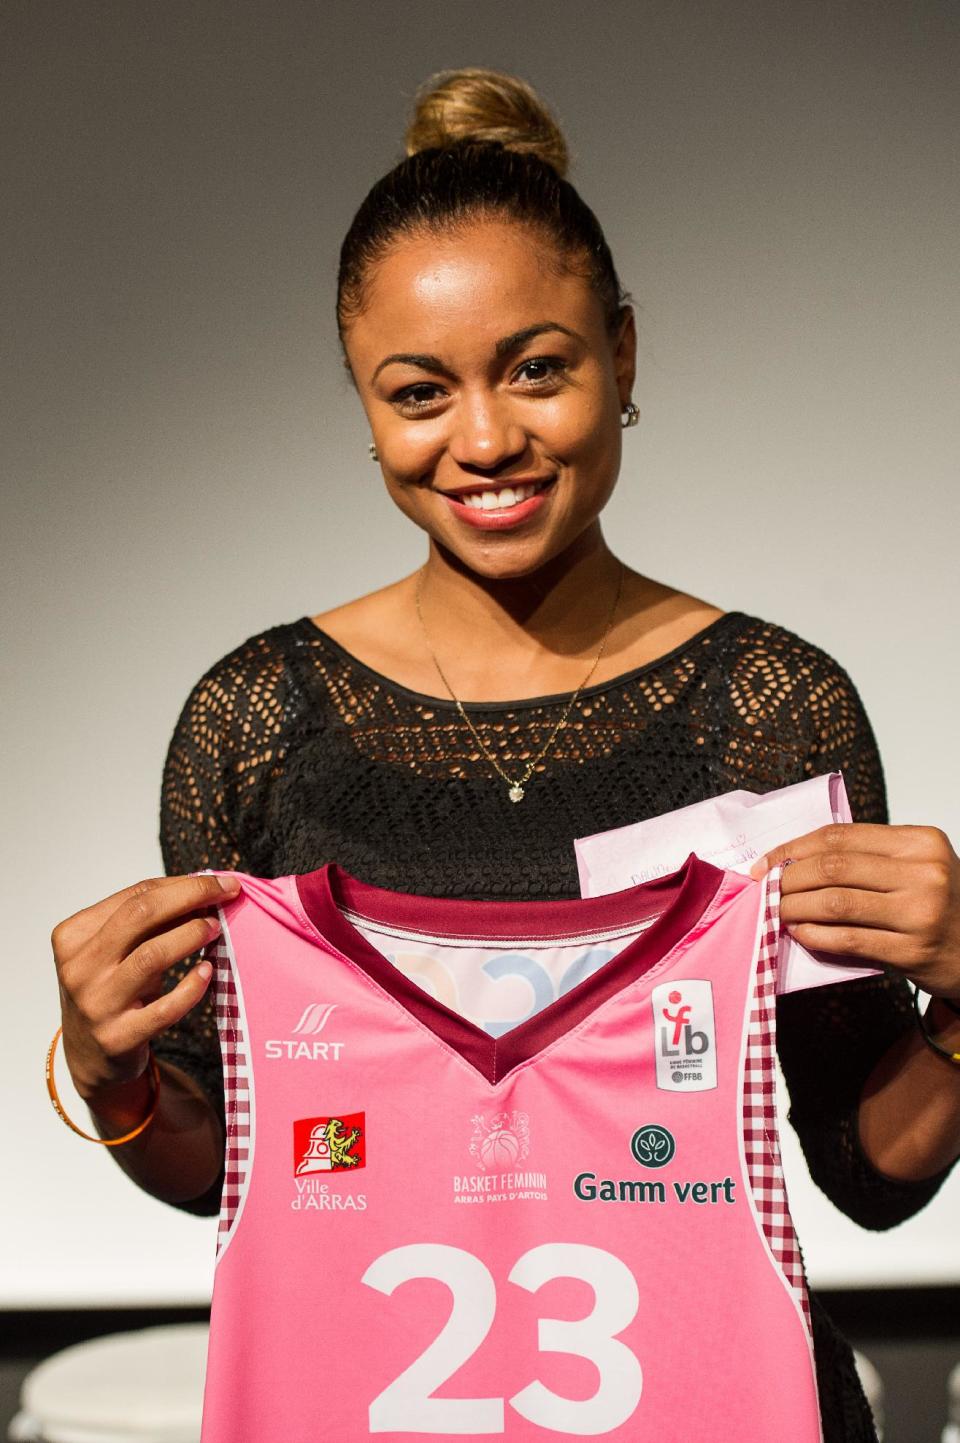 In this photo taken on Sept. 17, 2013, Arras' Dawn Evans, poses for photographers with her team's basketball jersey in Arras, northern France. Evans, one of the nation's leading scorers for three years as a point guard at James Madison, has left her professional team in France and returned to Tennessee to prepare for a kidney transplant. (AP Photo/Pascal Bonniere, VDN)